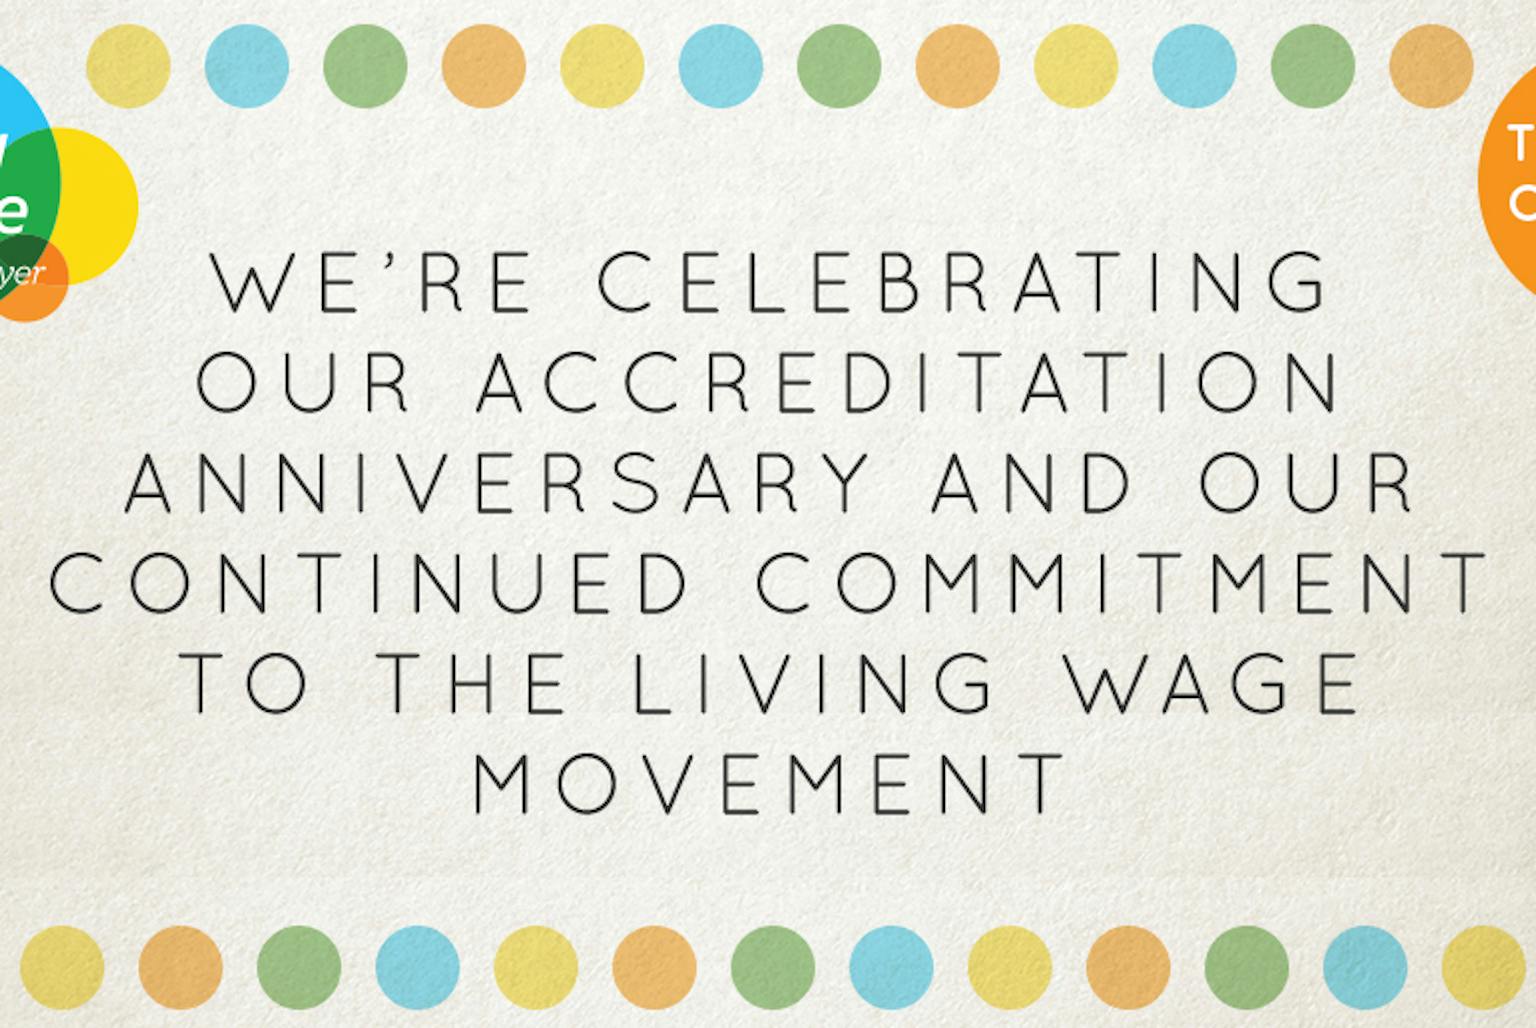 LUC celebrates a year of Living Wage commitment